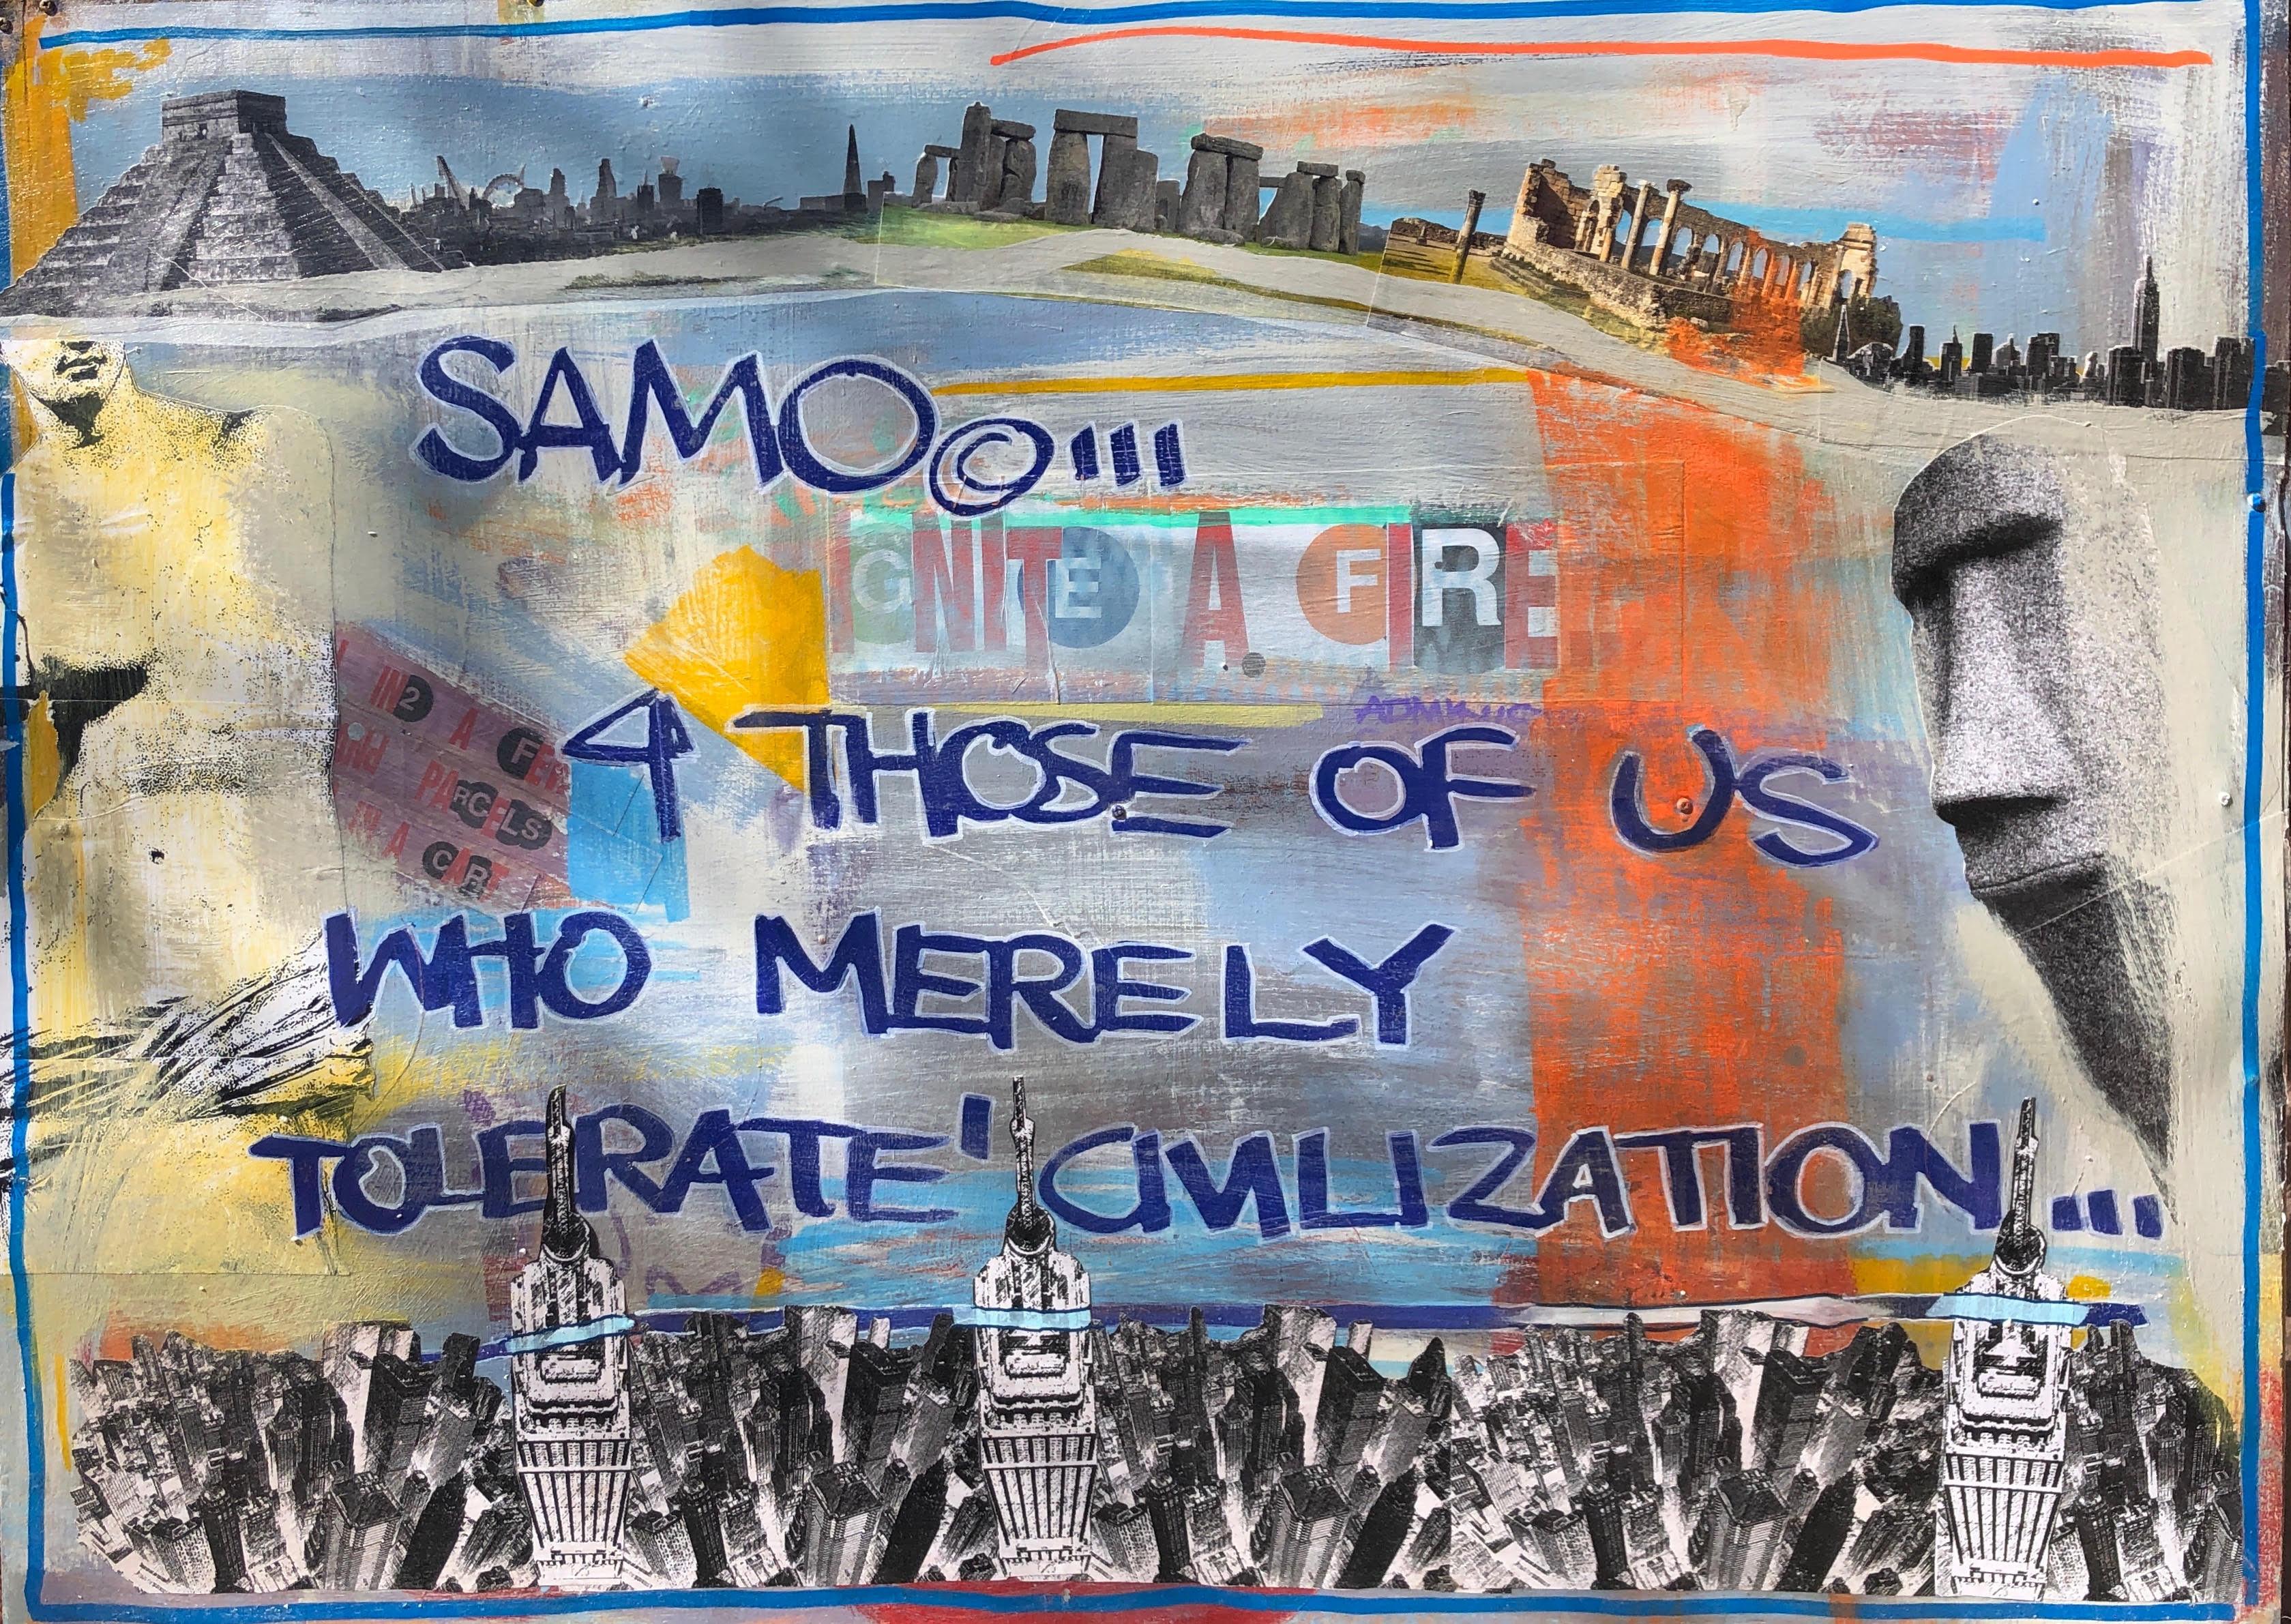 "4 Those of us Who Merely Tolerate 'Civilization'..." - Mixed Media Art by Al Diaz